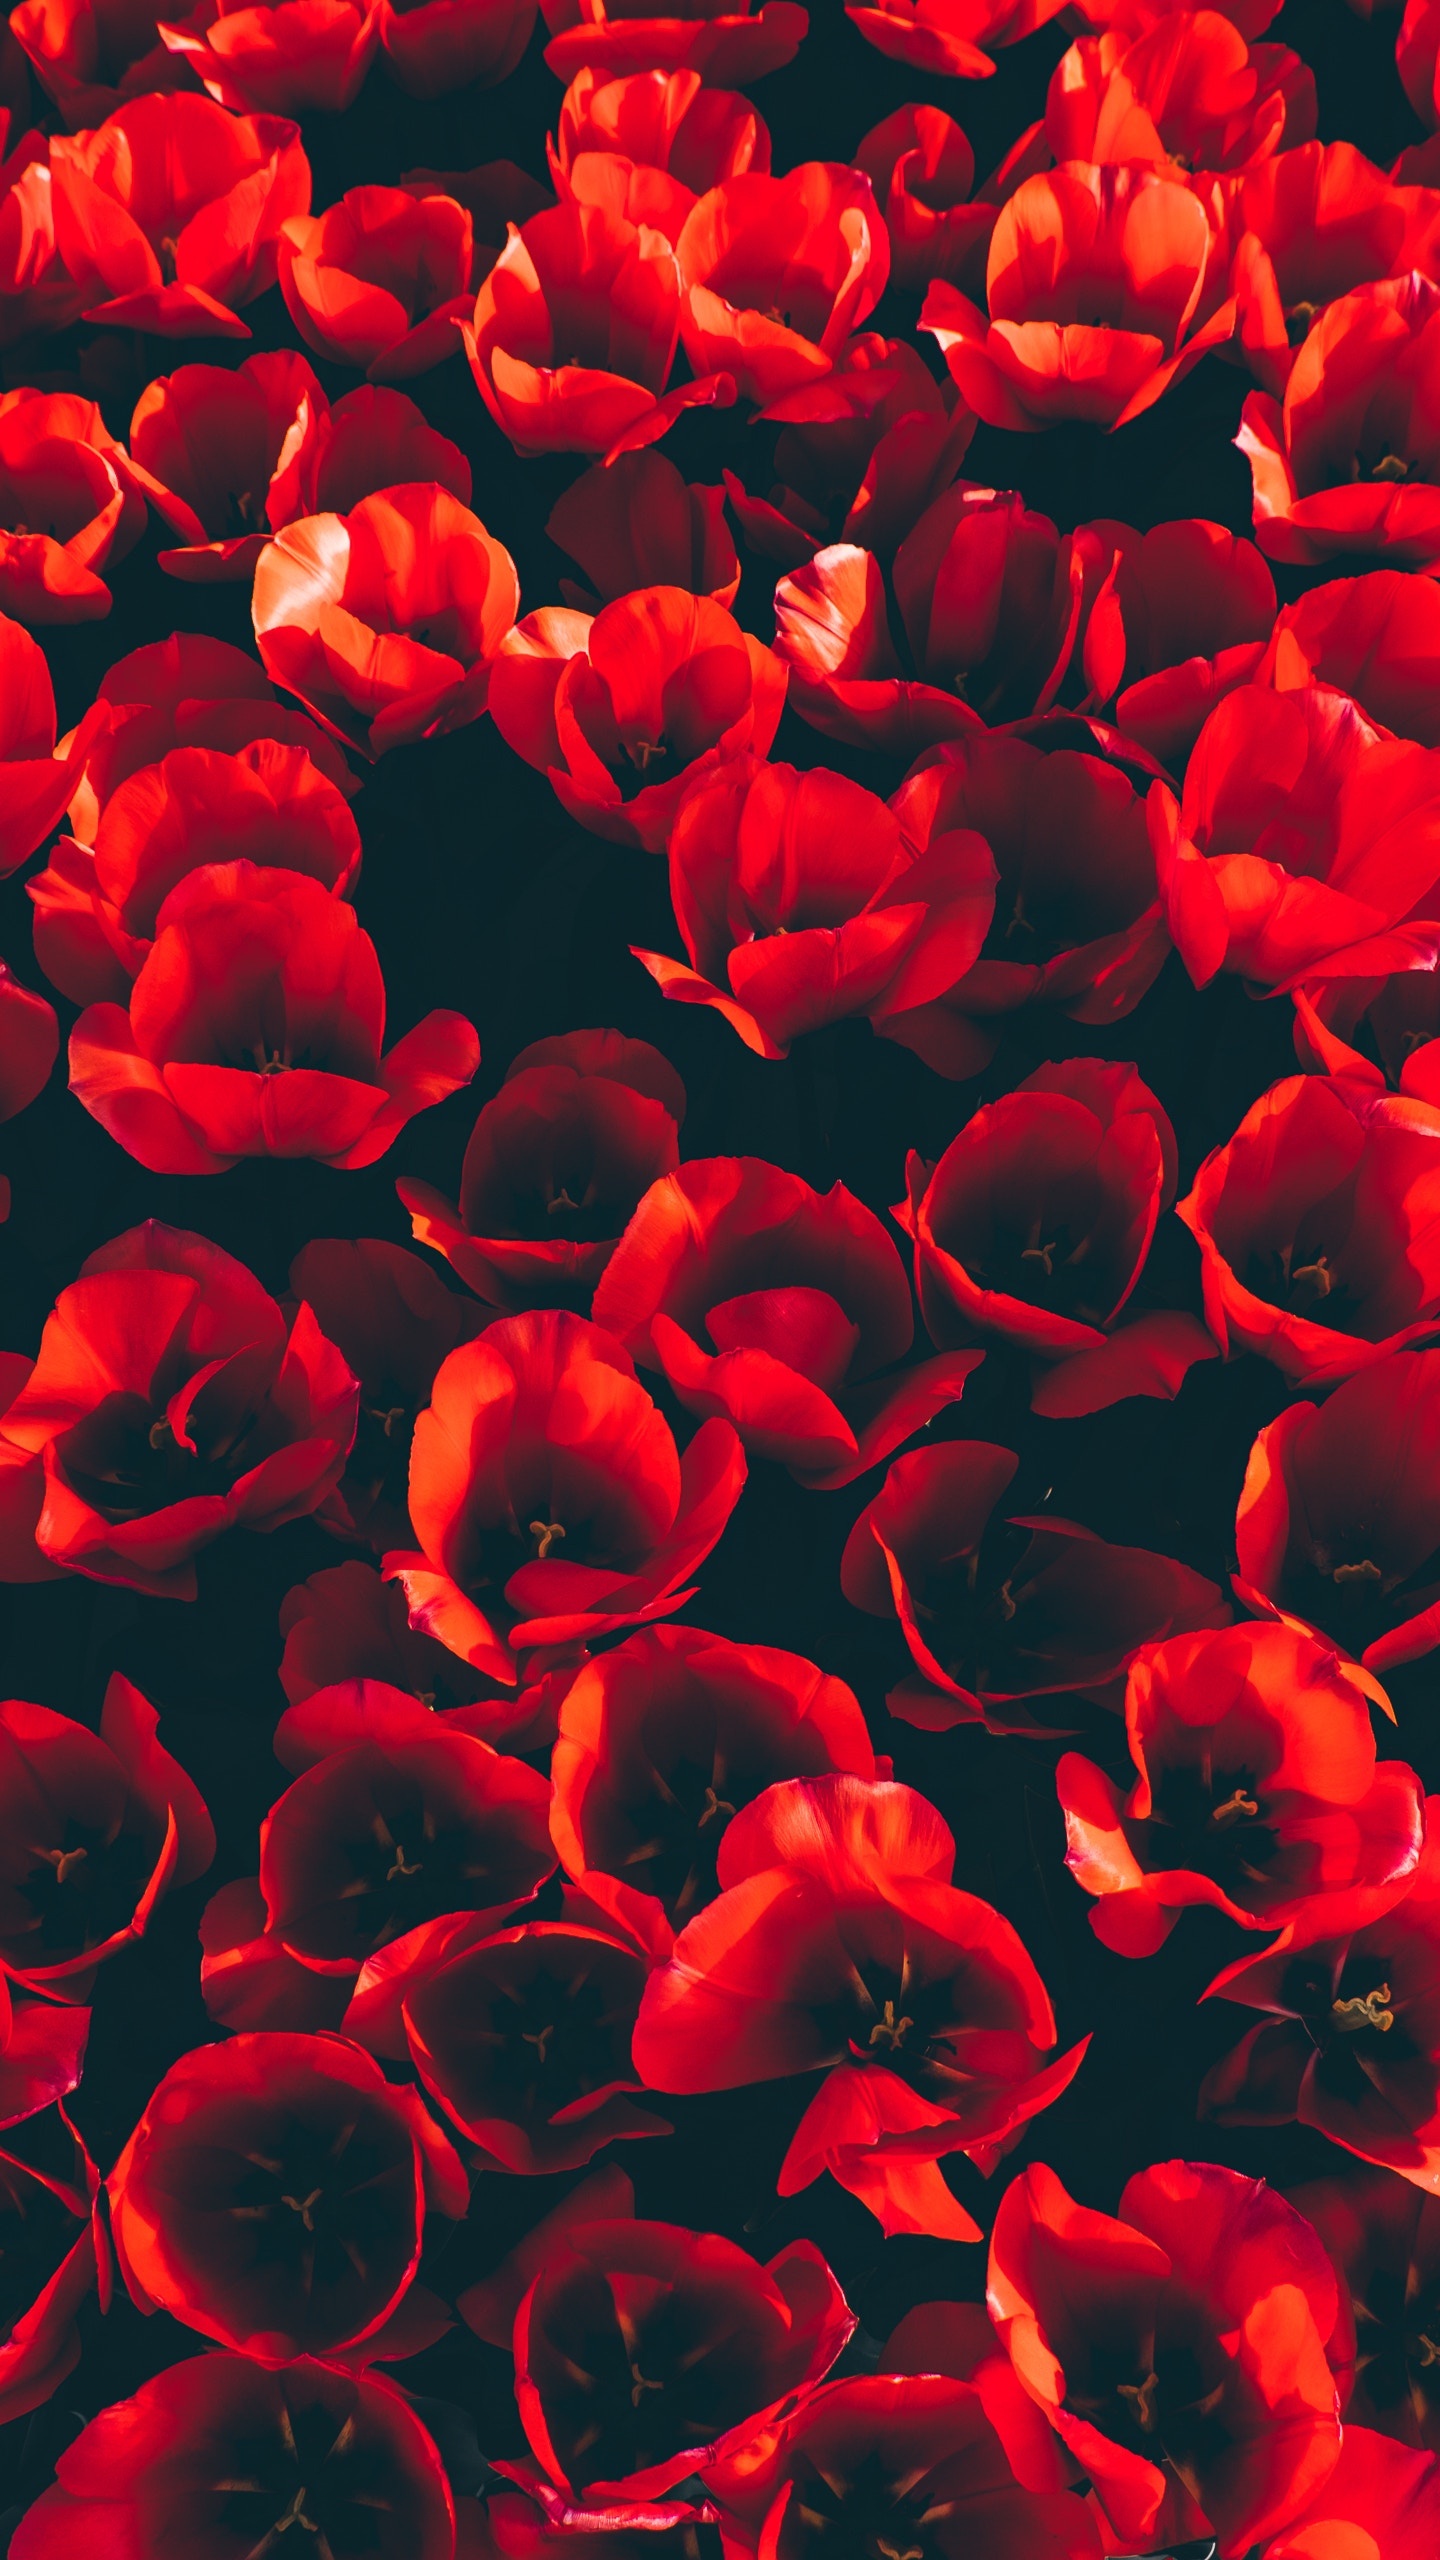 Red Flower Petals in Close up Photography. Wallpaper in 1440x2560 Resolution